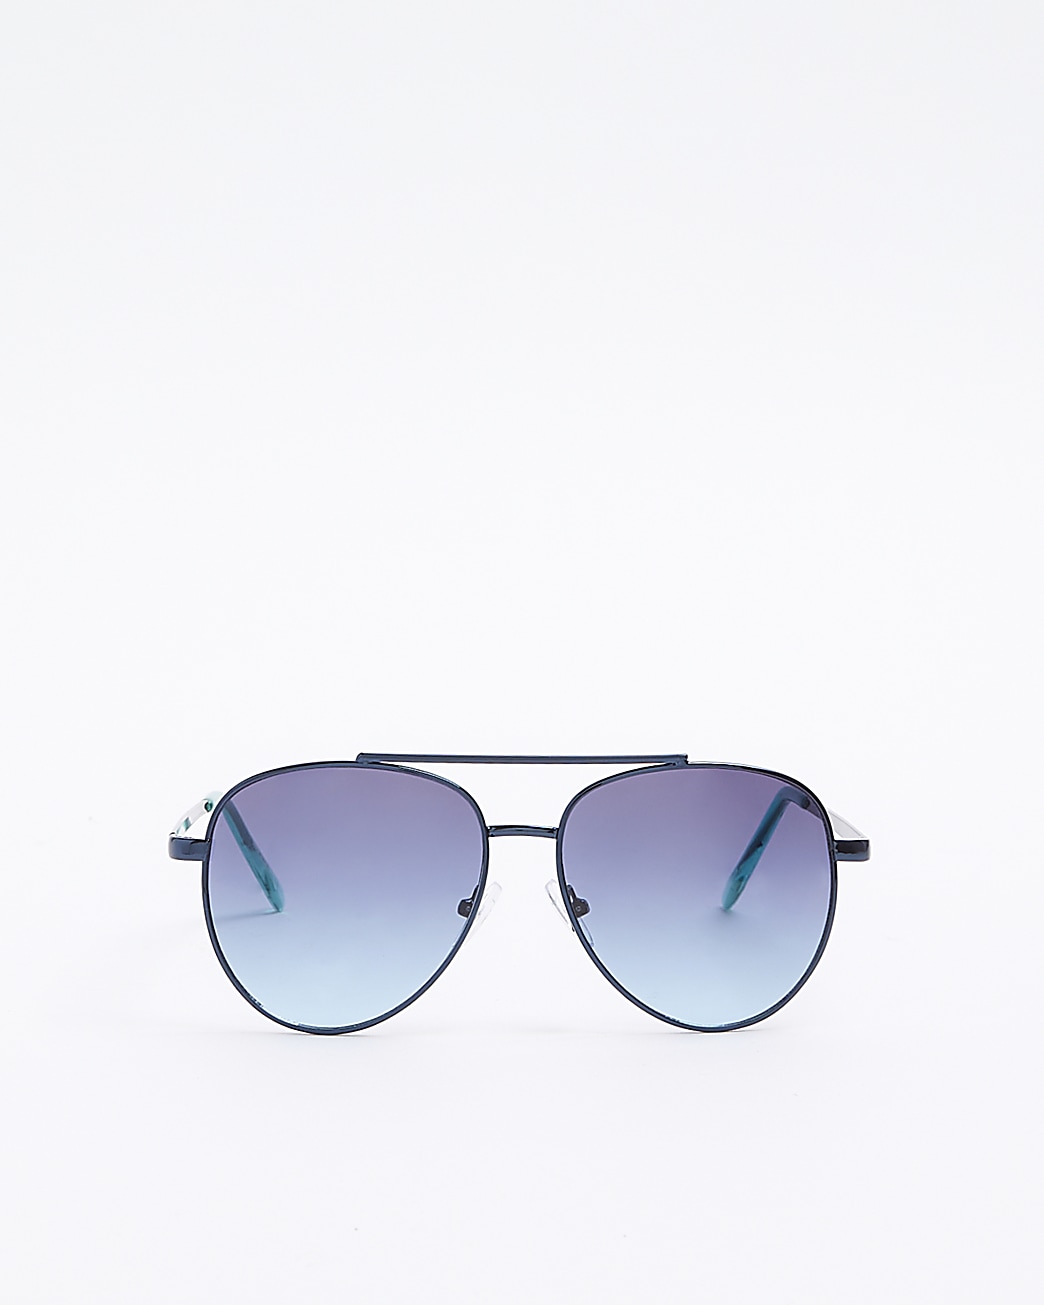 Visual filter display for Sunglasses